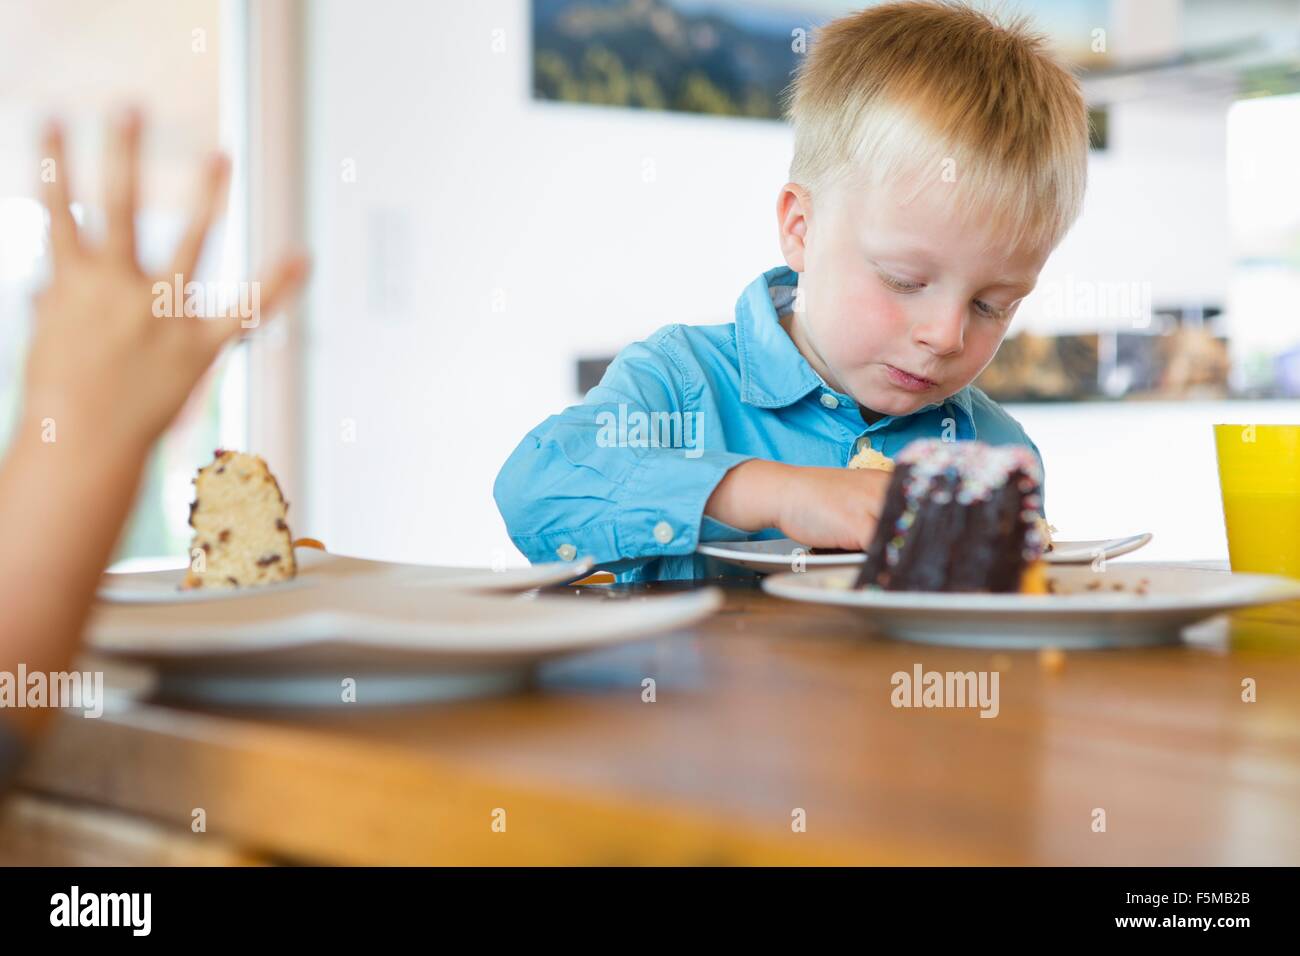 Male toddler eating cake at tea table Stock Photo